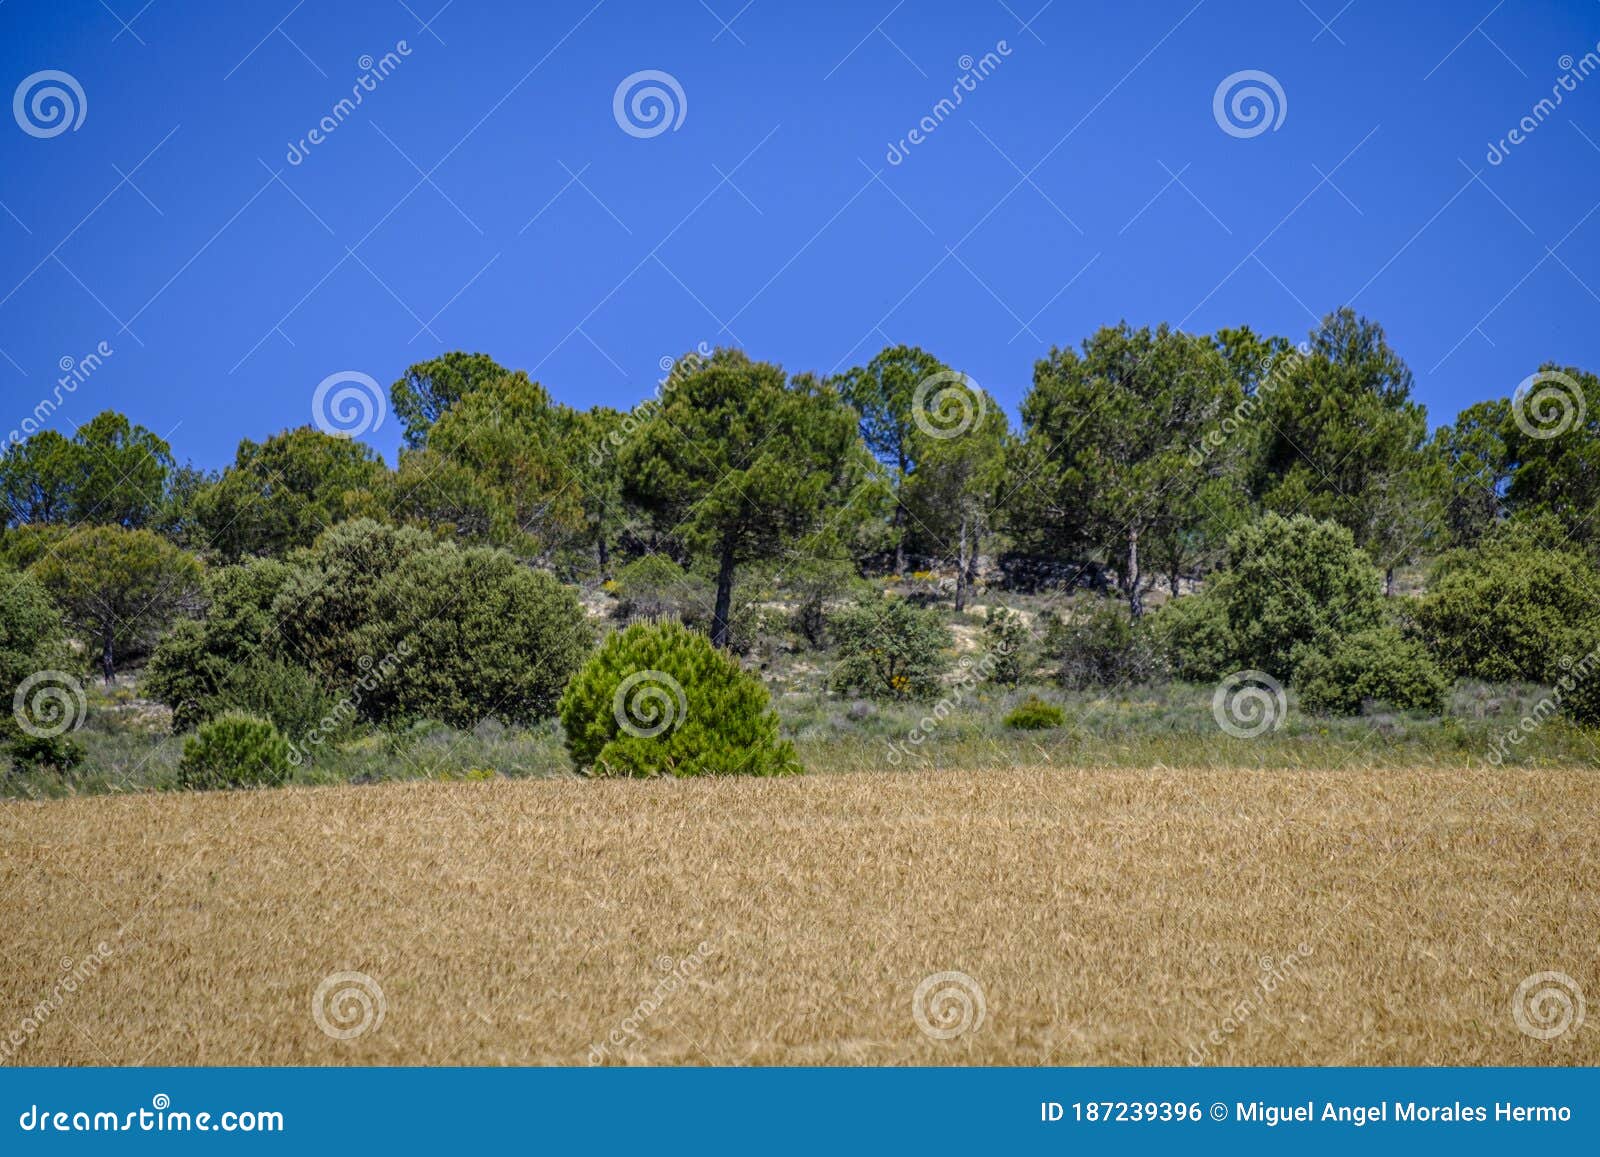 cultivated fields, in the interior spain.